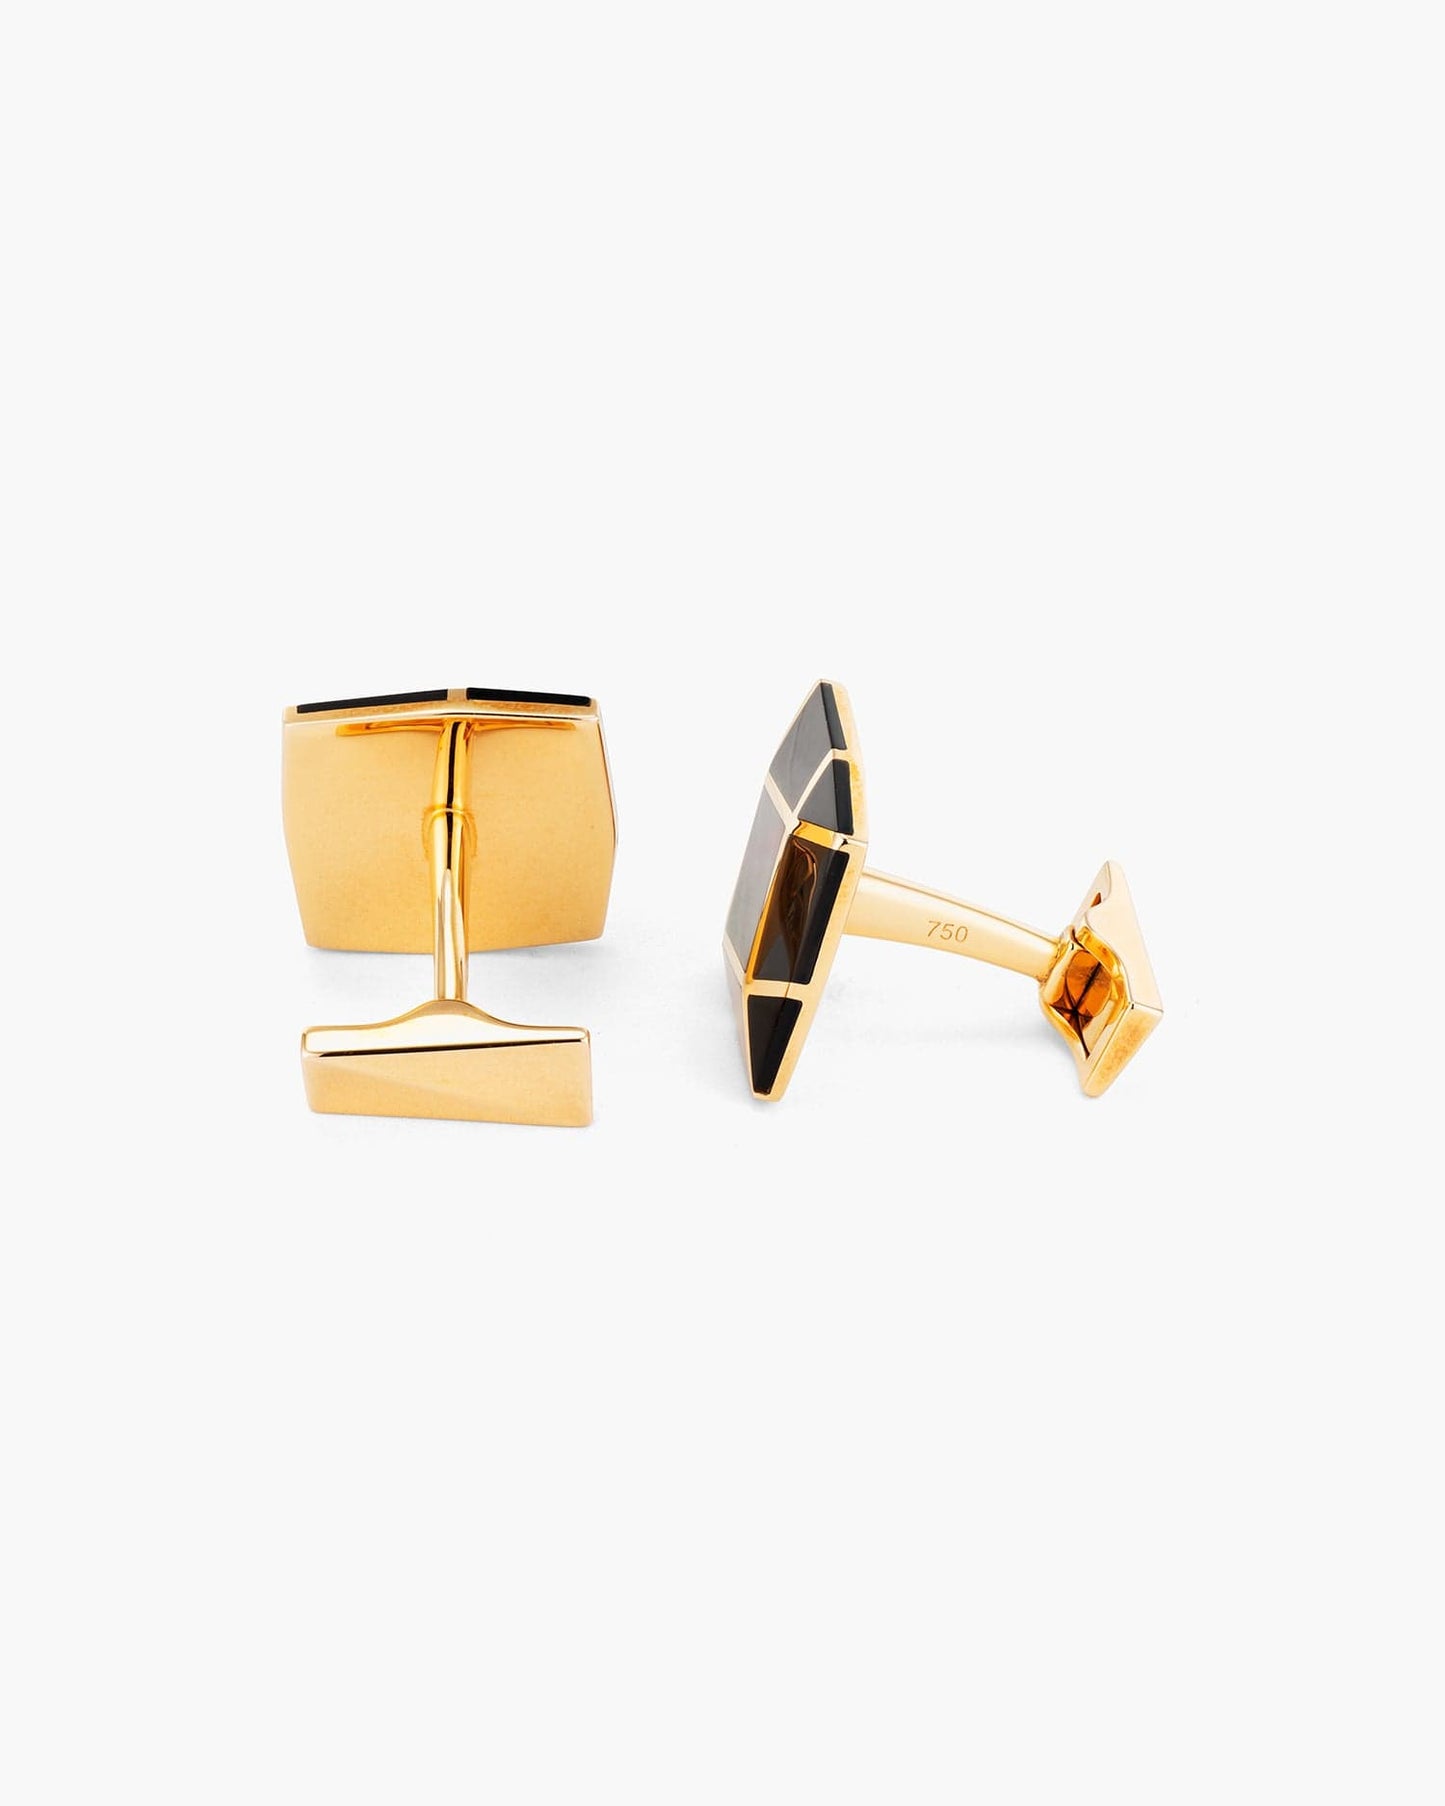 Black Mother of Pearl and Onyx Angular Checkerboard Cufflinks